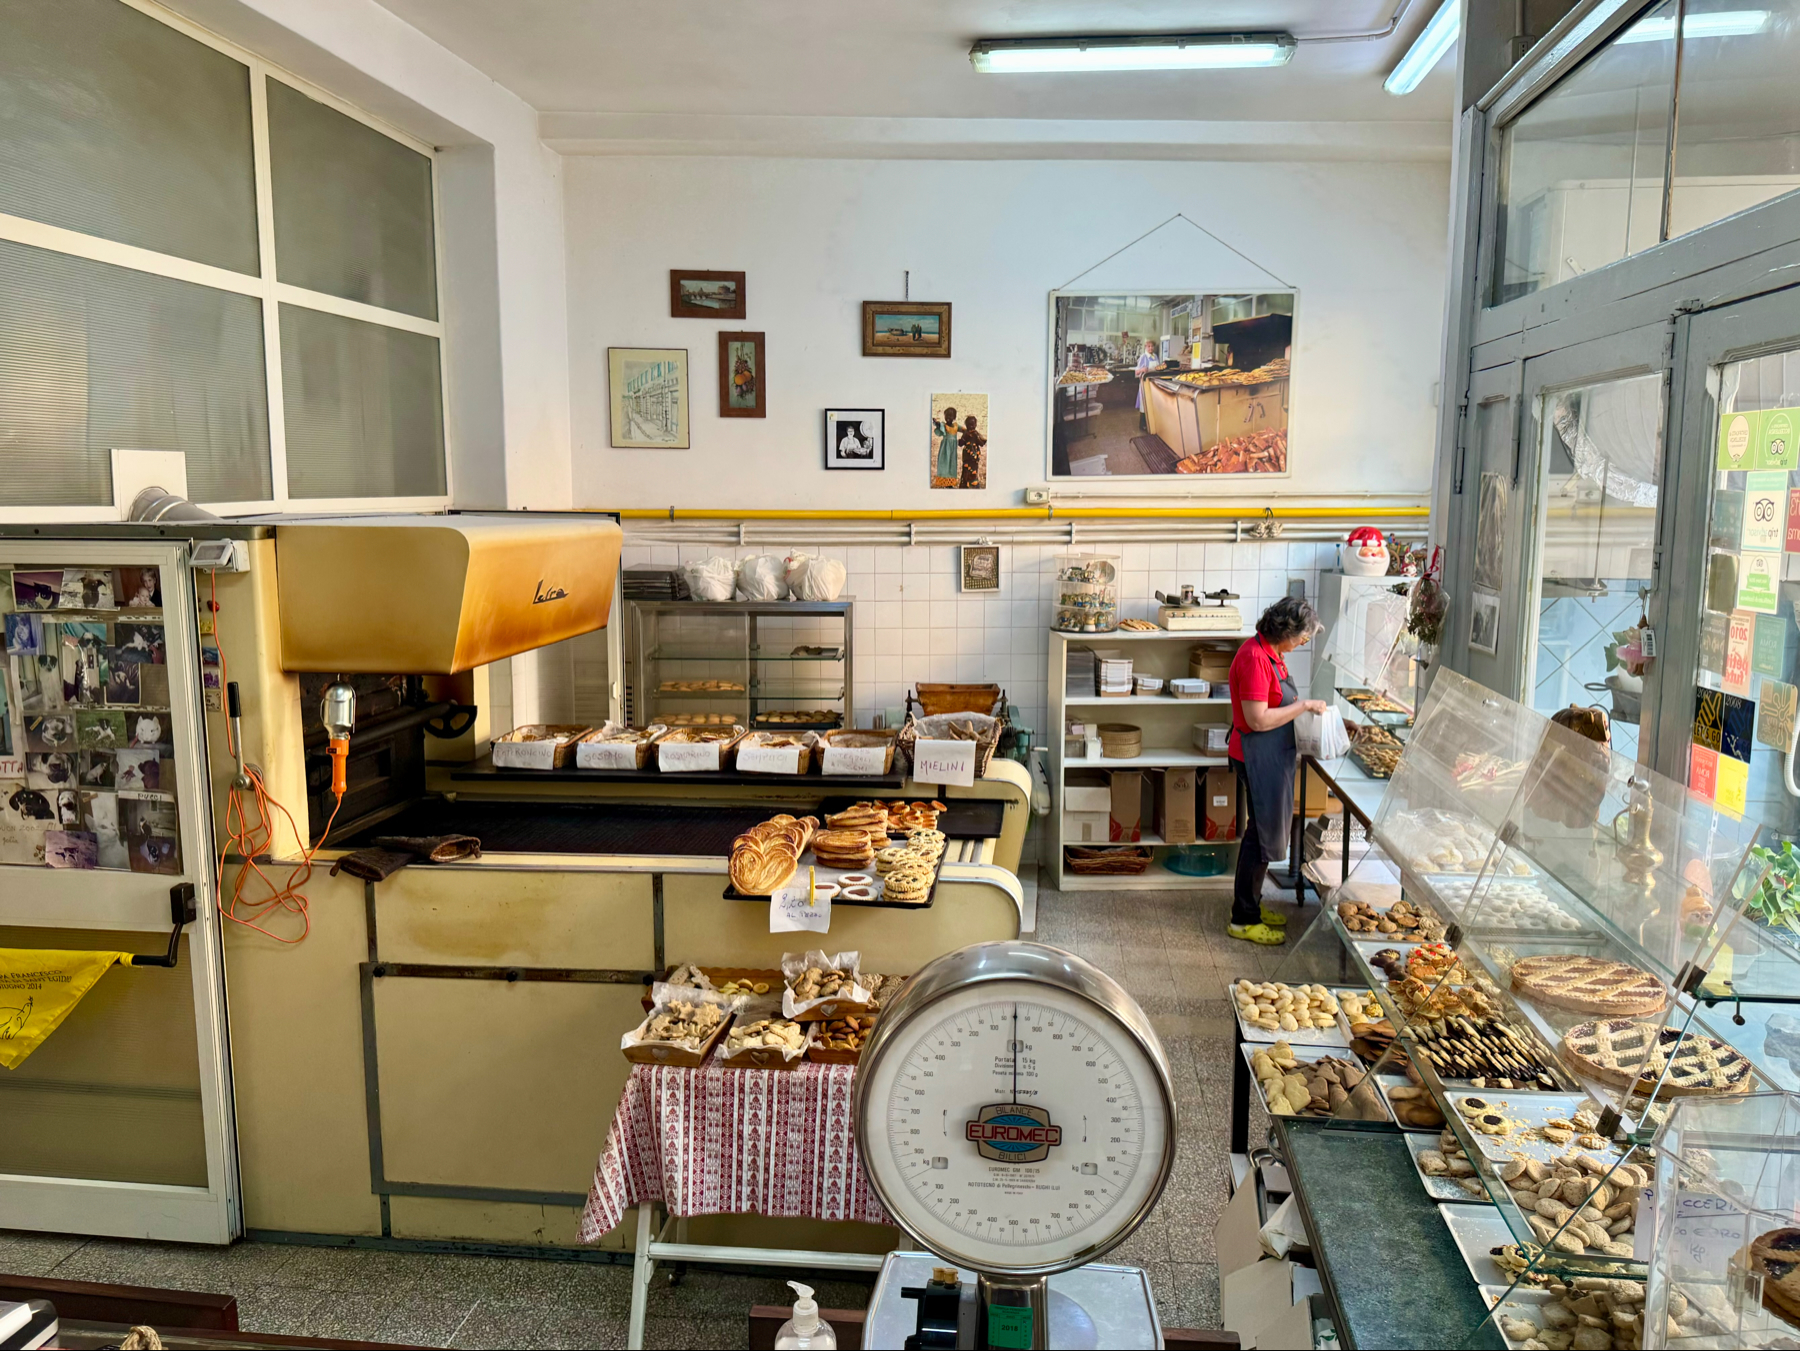 A quaint bakery with a vintage aesthetic. Various baked goods, including bread and pastries, are displayed on counters and shelves. A woman in a red shirt is working behind the counter. The bakery features large baking equipment and a glass display case.